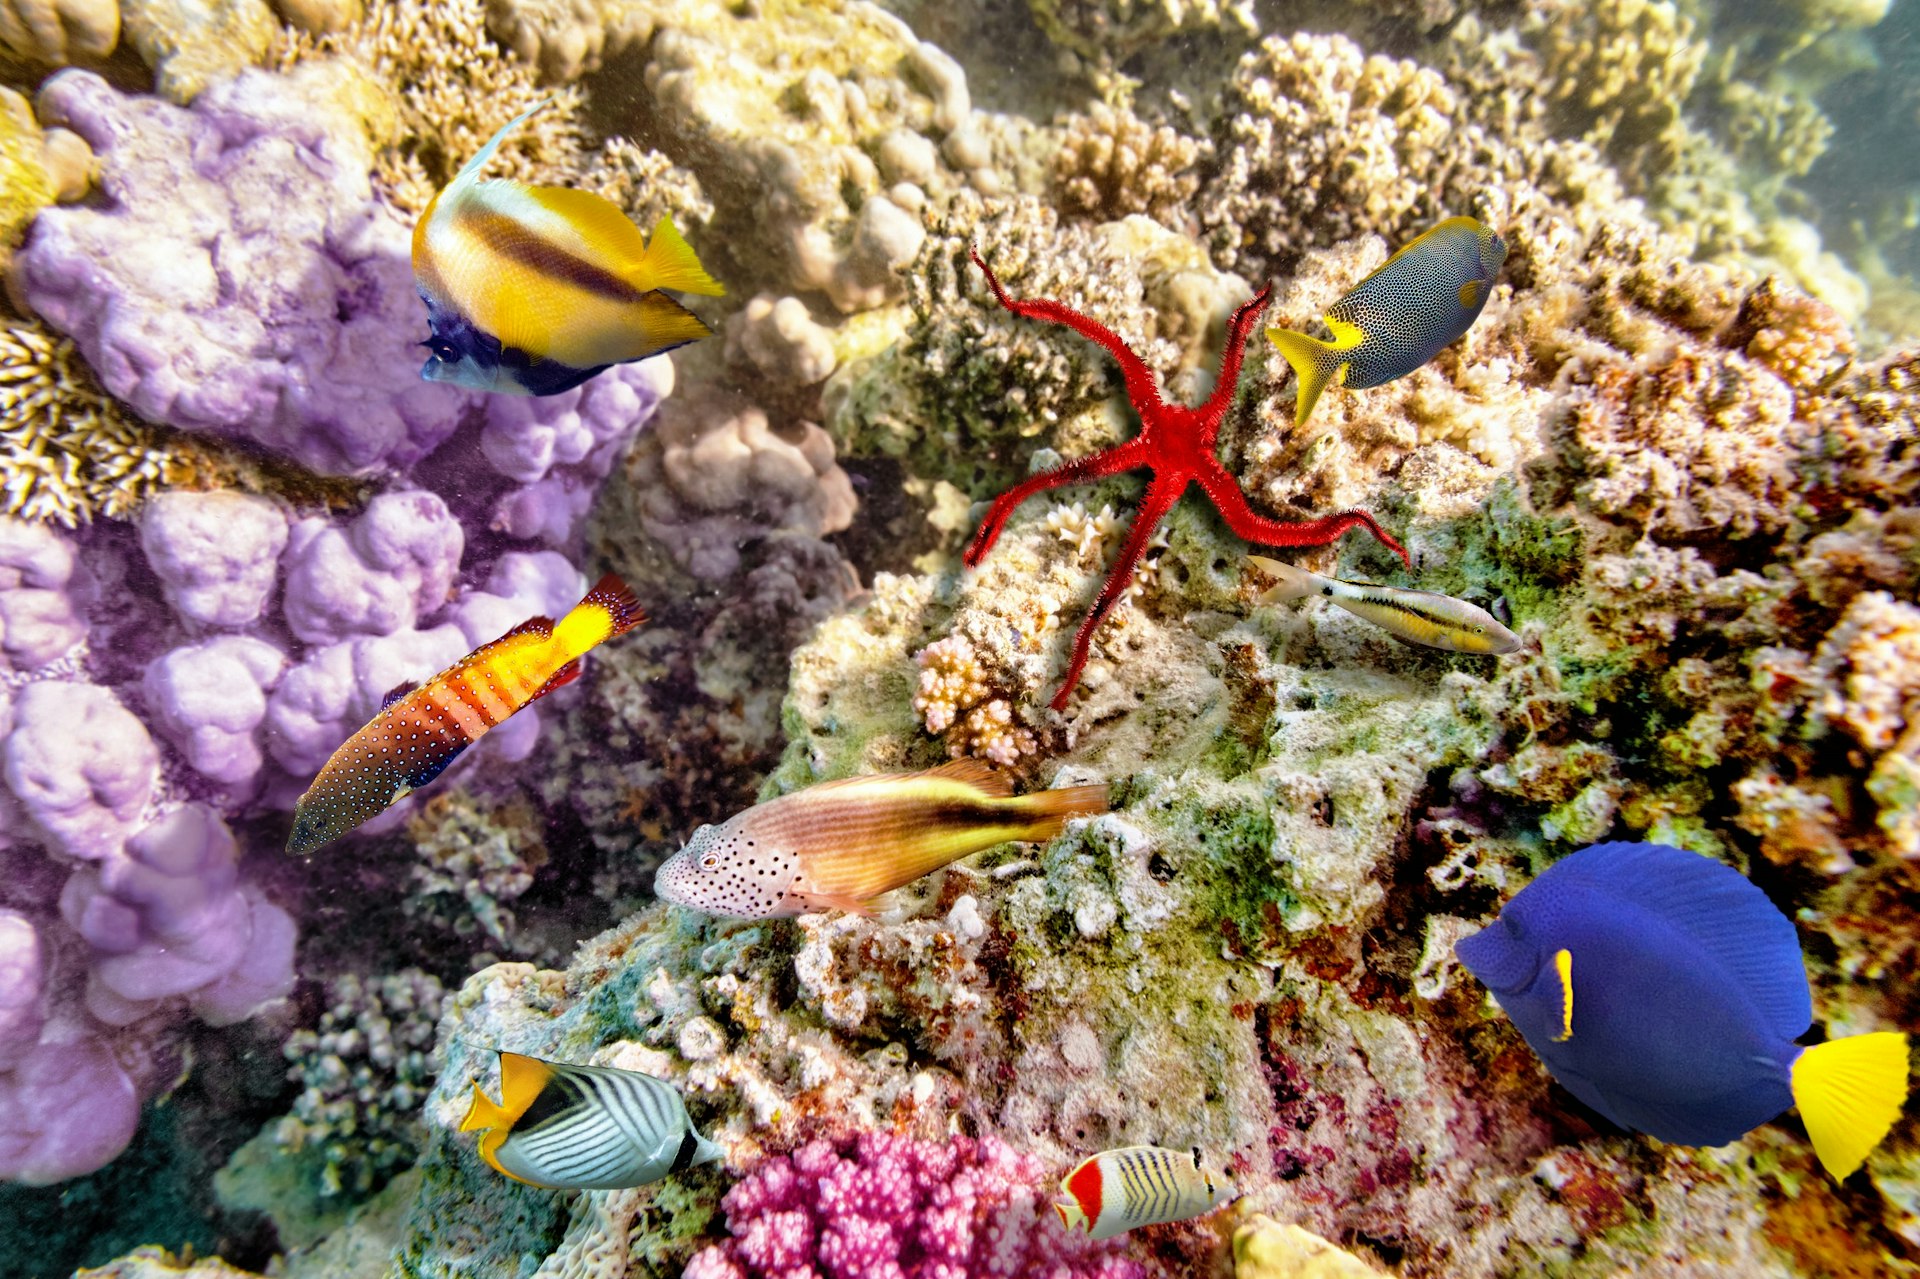 A close-up shot of colourful coral of varied shapes. Several different tropical fish are moving near the reef, with a large red starfish in the centre